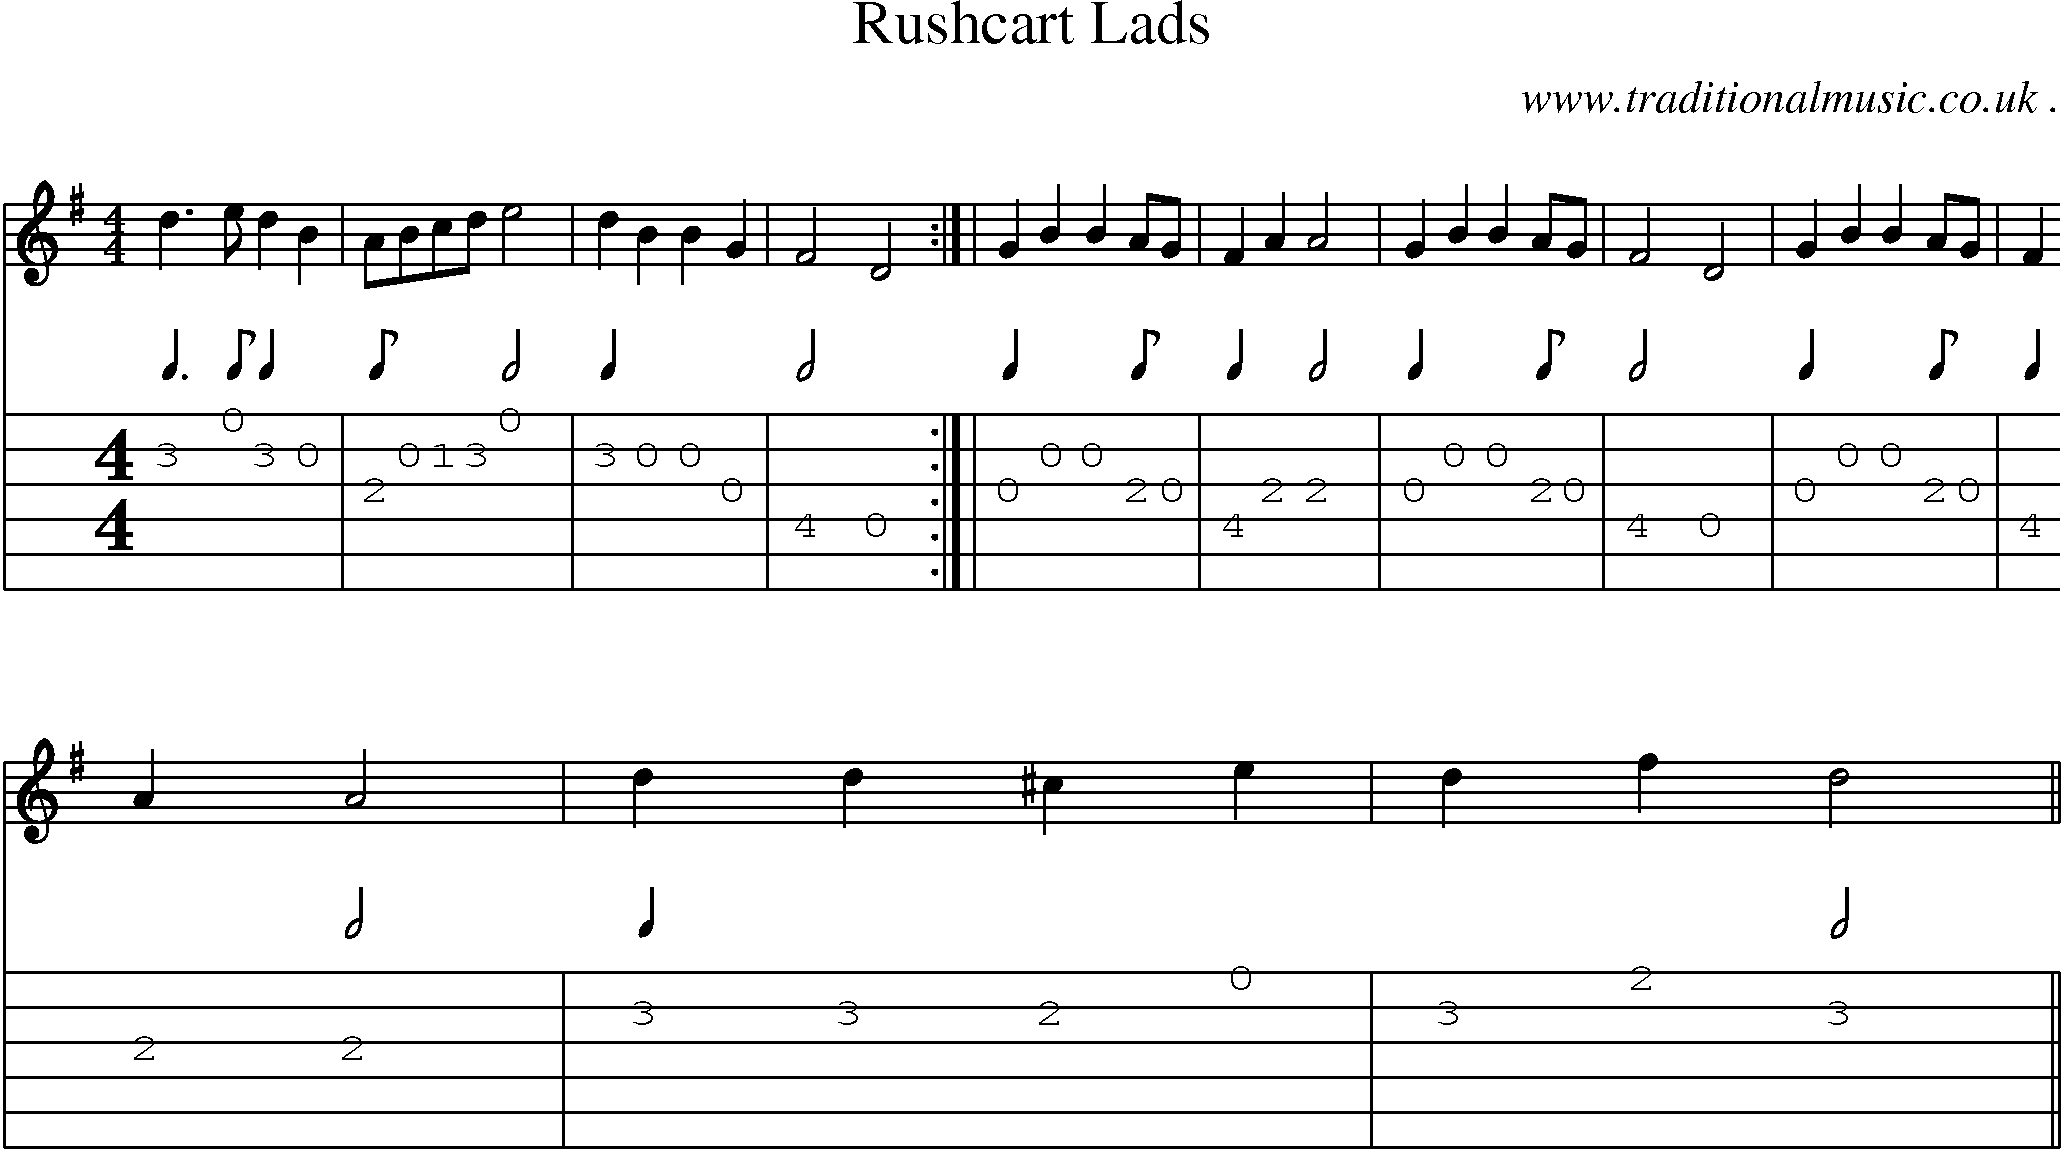 Sheet-Music and Guitar Tabs for Rushcart Lads